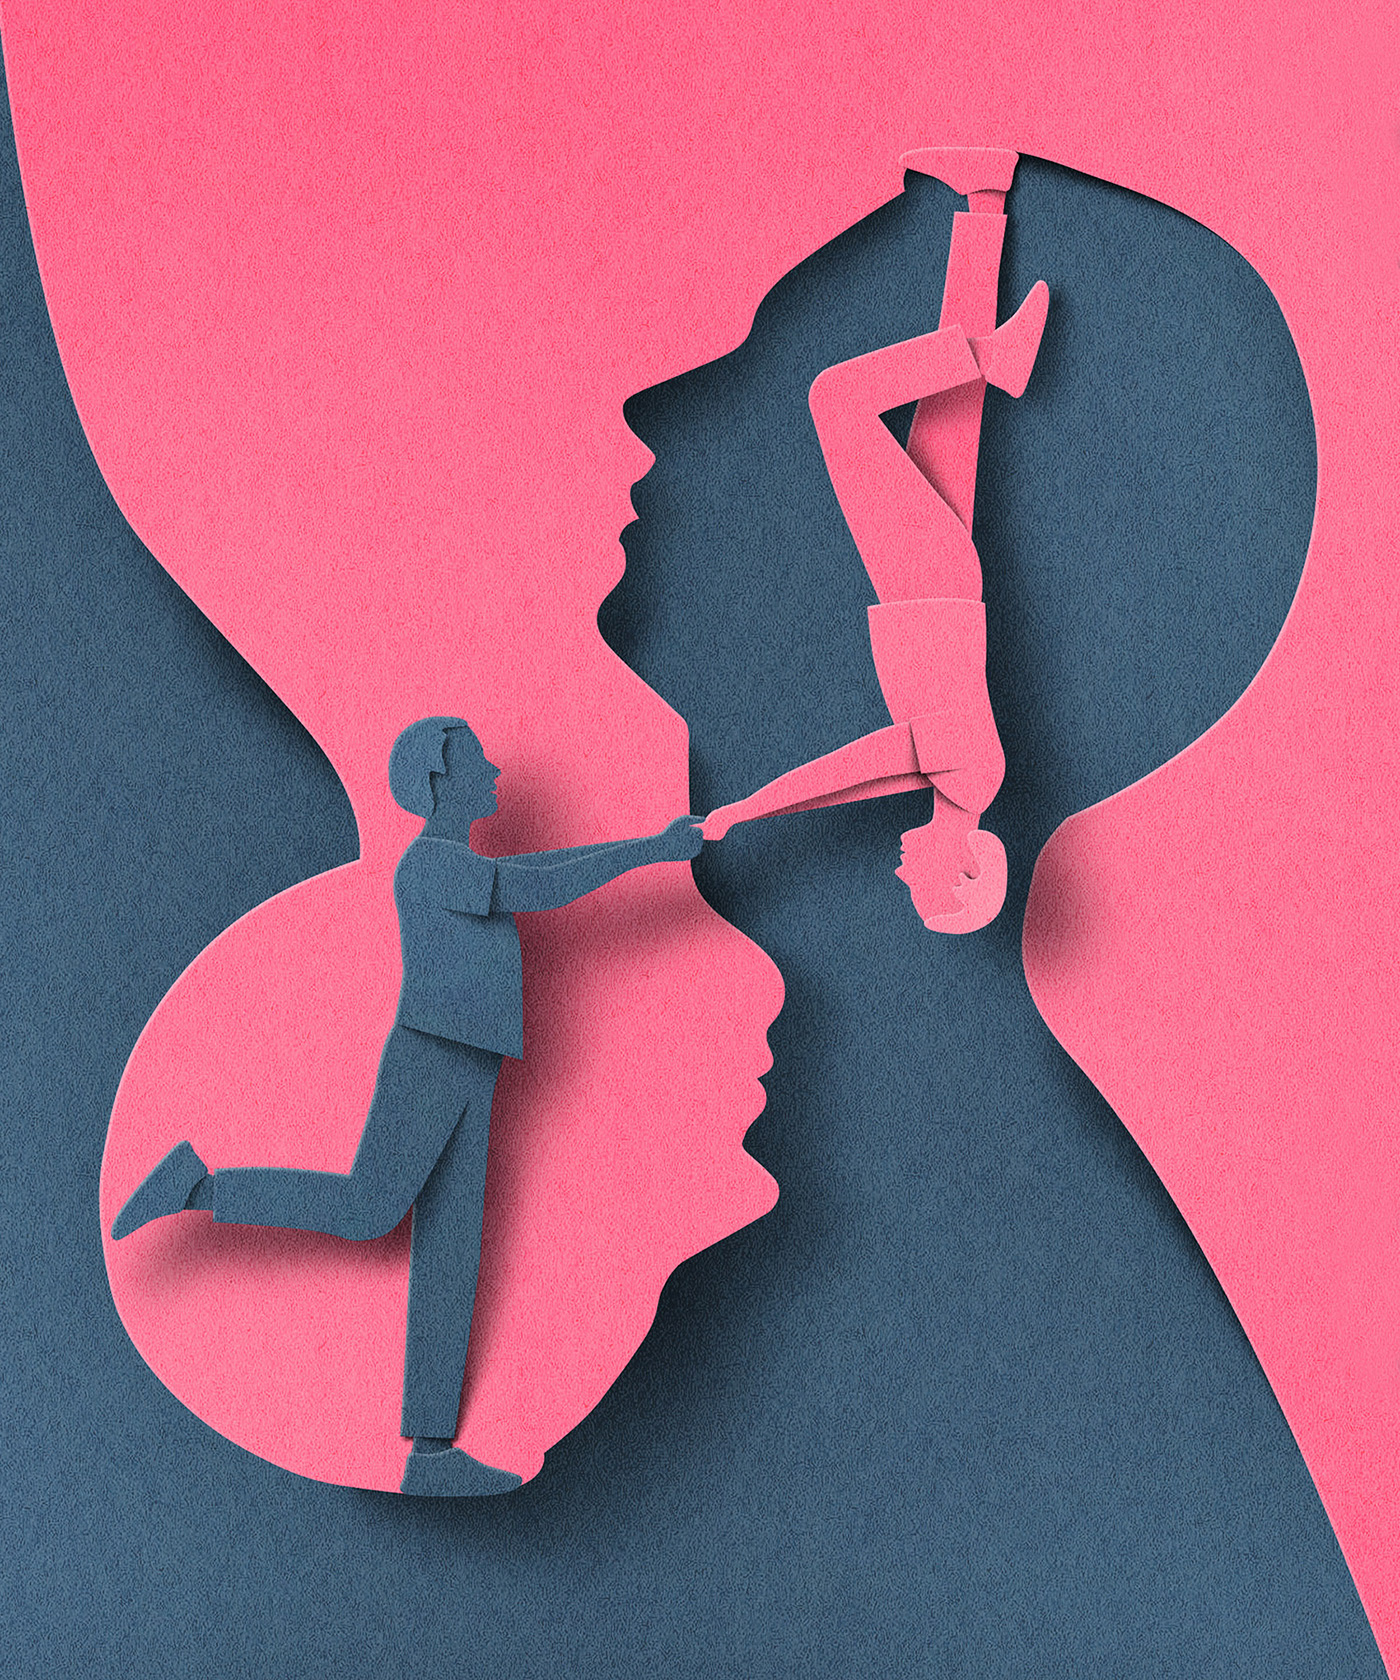 Illustration for Apple Tab Today about dating apps - Editorial illustrations by Eiko Ojala